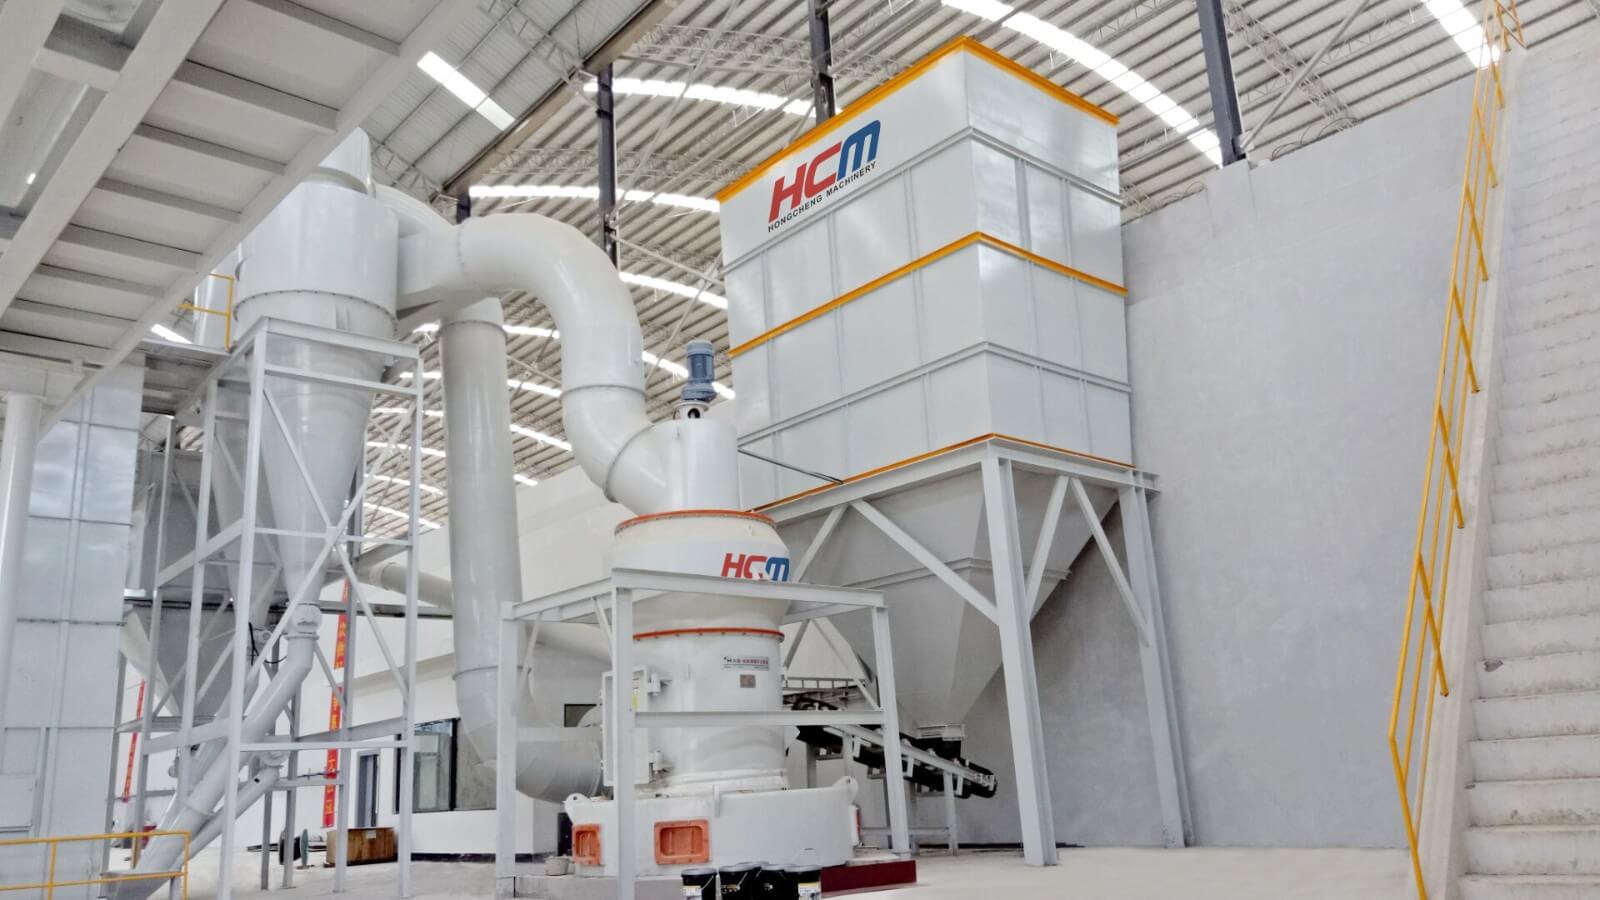 High calcium stone grinding production line